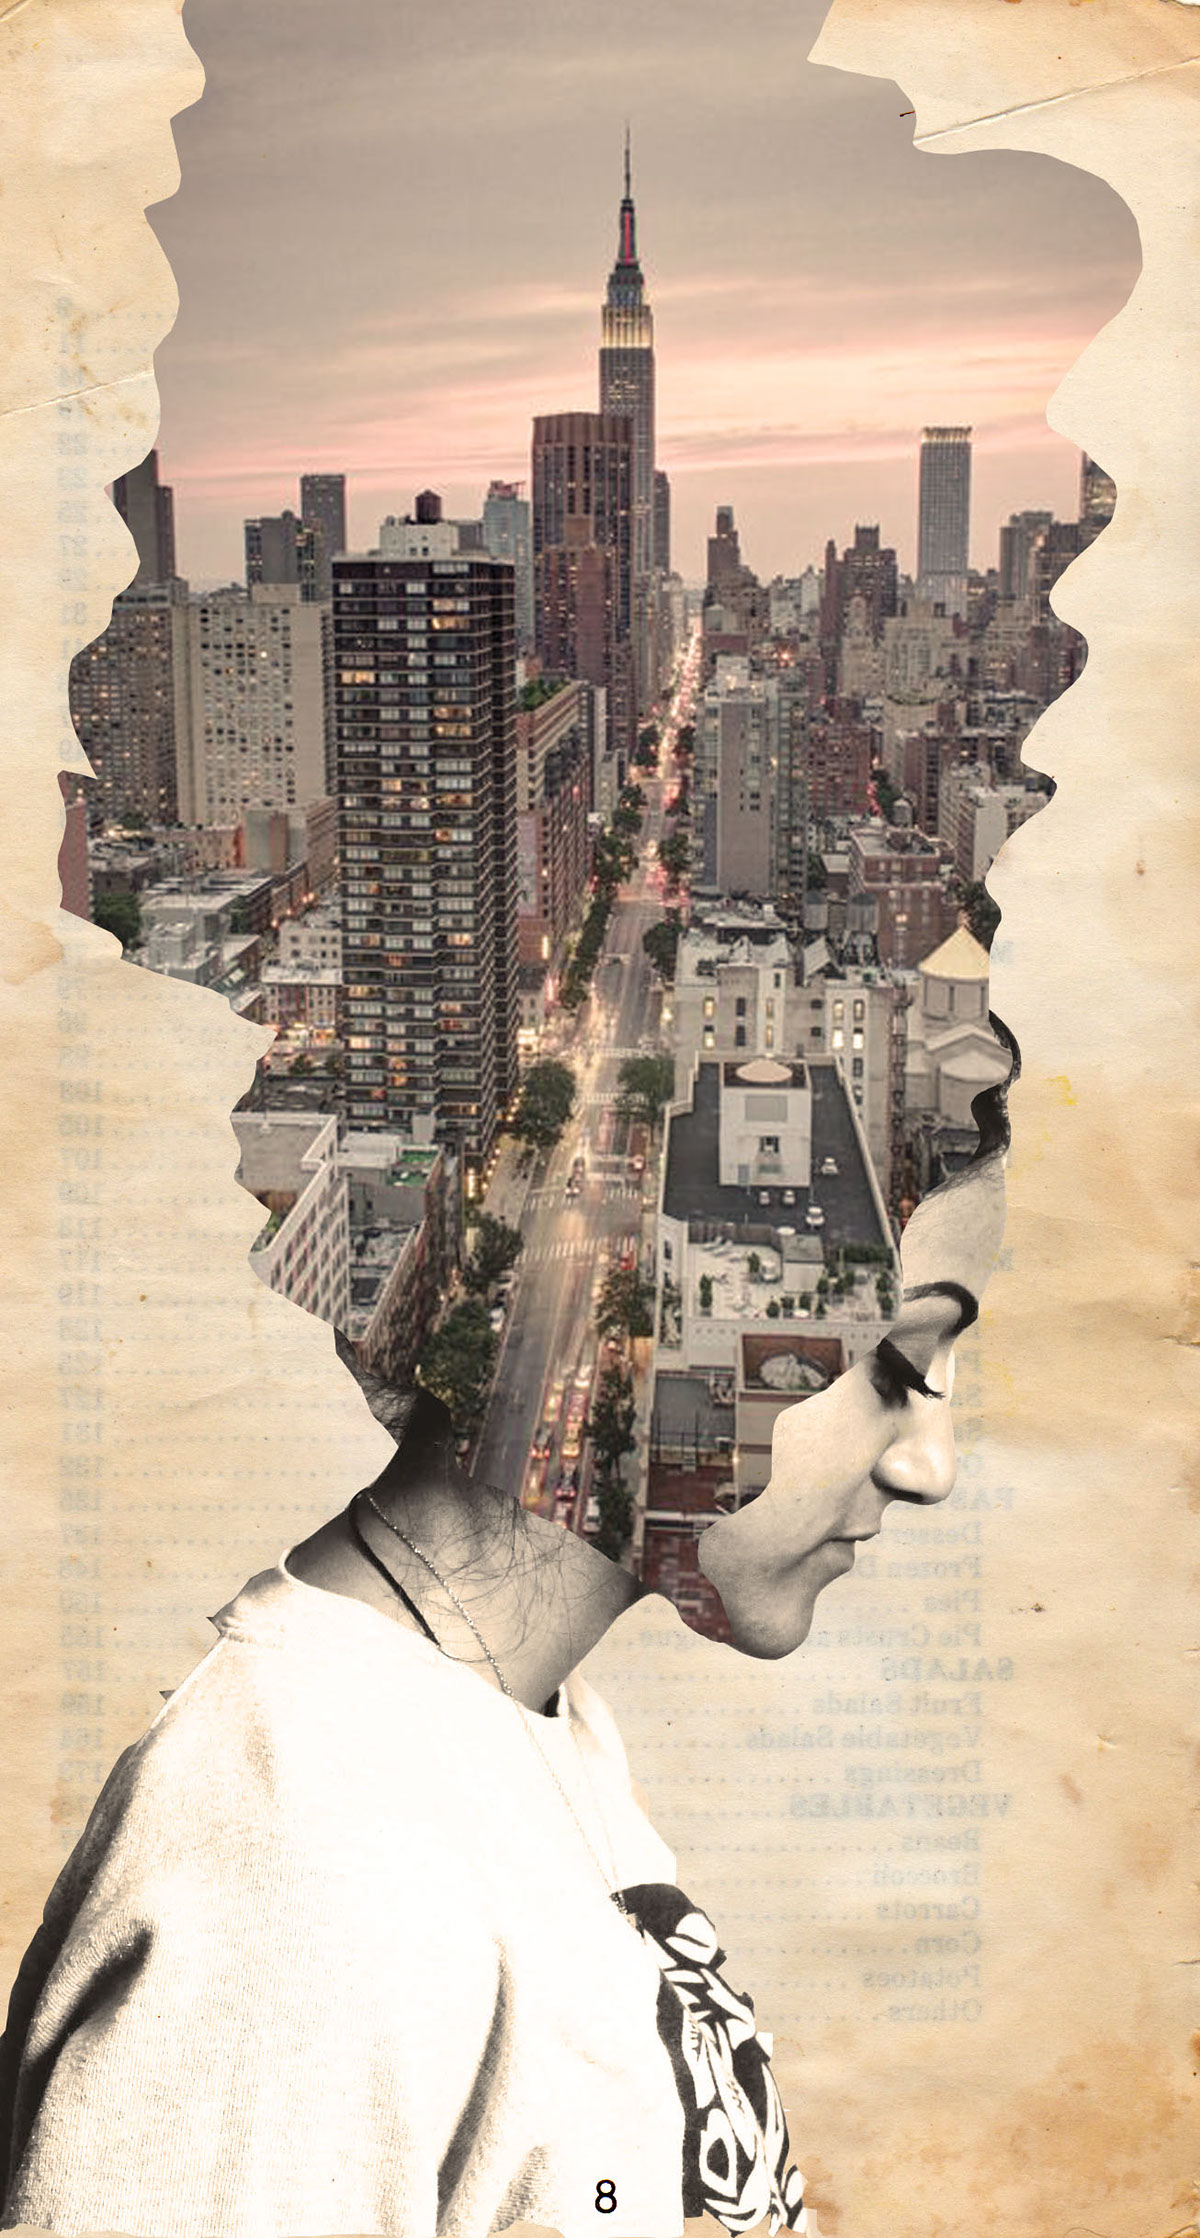 Conceal and Reveal hidden emotions feelings city double exposure pictures